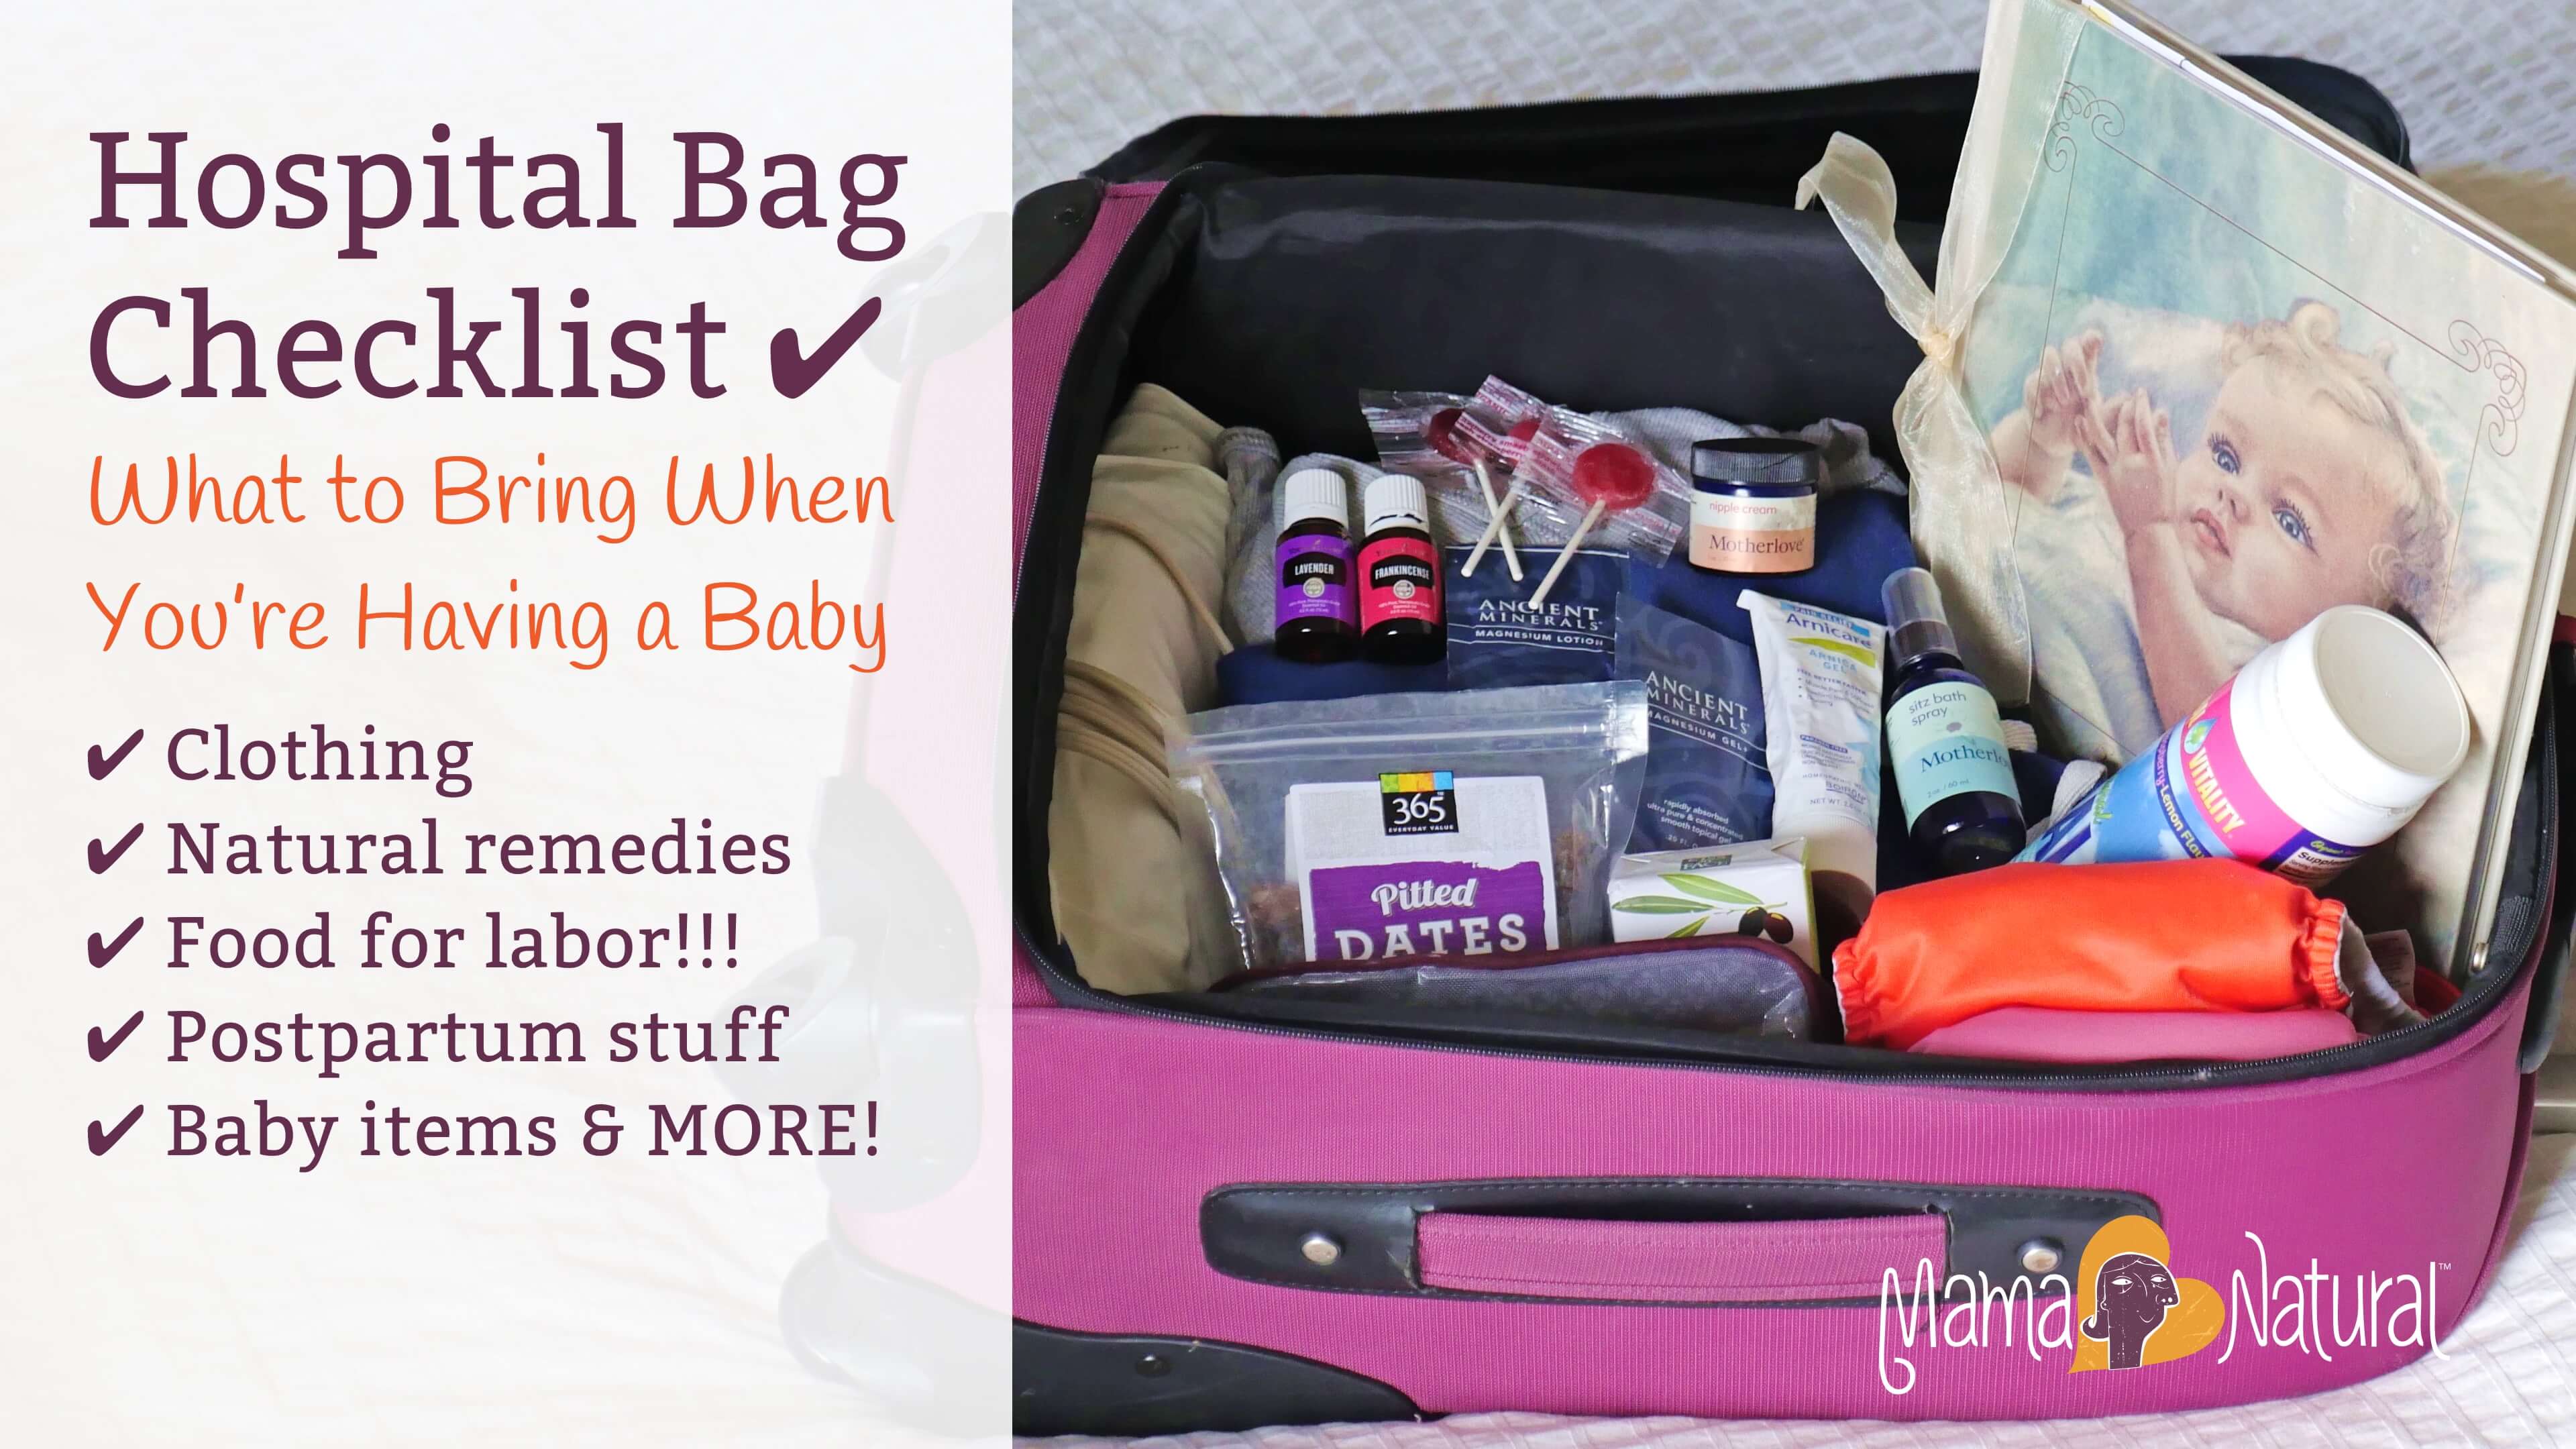 Hospital Bag Checklist: What to Bring for Mom and Baby